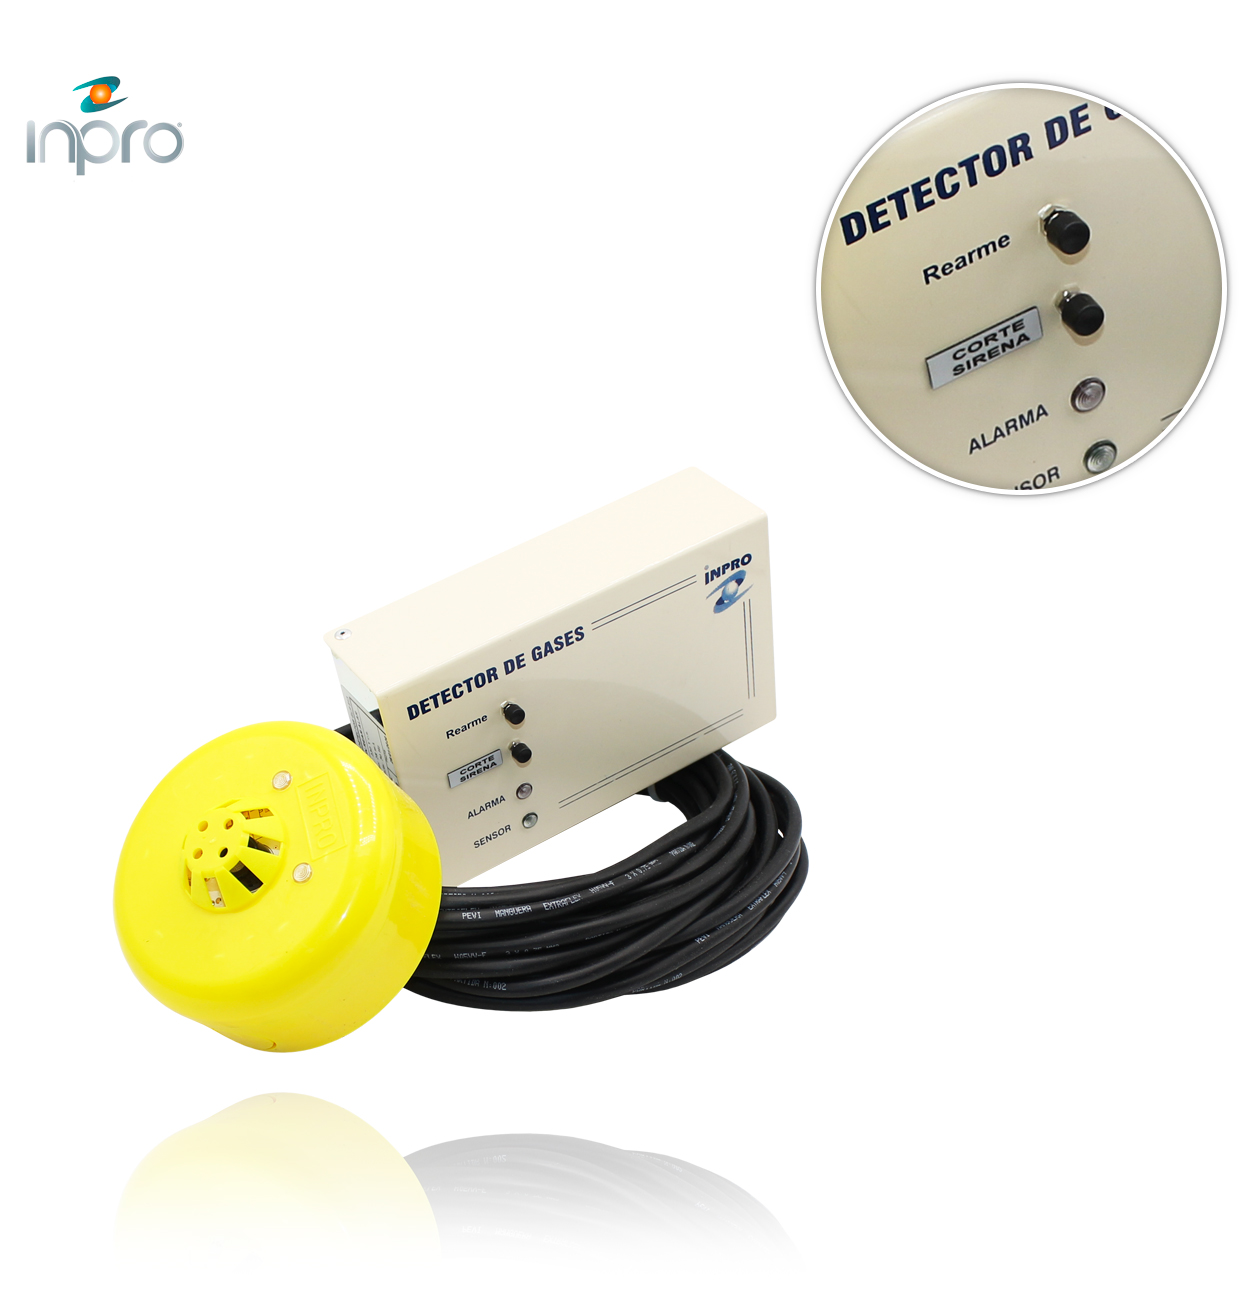 LPG -813 DETECTOR WITH MANUAL RESET, ALARM, PROBE AND 10m CABLE